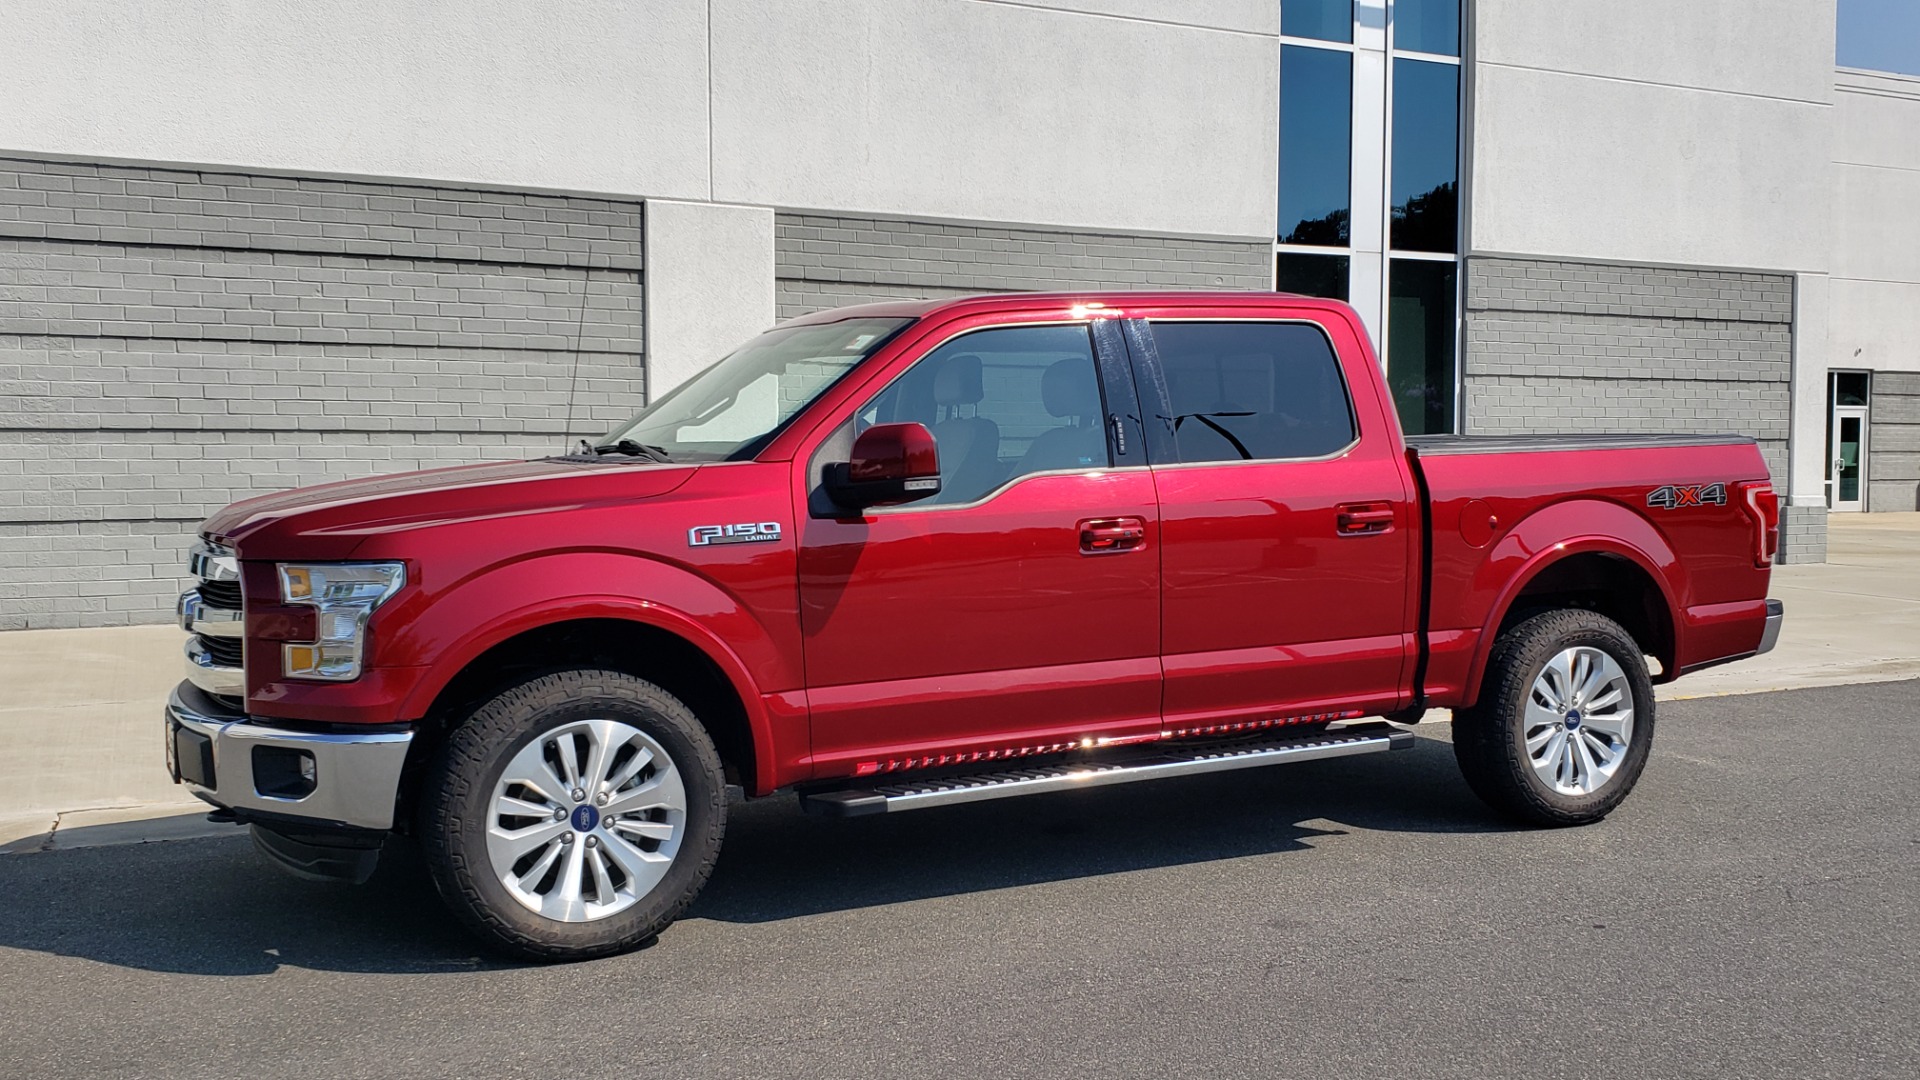 Used 2015 Ford F-150 LARIAT 4X4 SUPERCREW / 5.0L V8 / AUTO / NAV / SUNROOF / REARVIEW for sale Sold at Formula Imports in Charlotte NC 28227 4